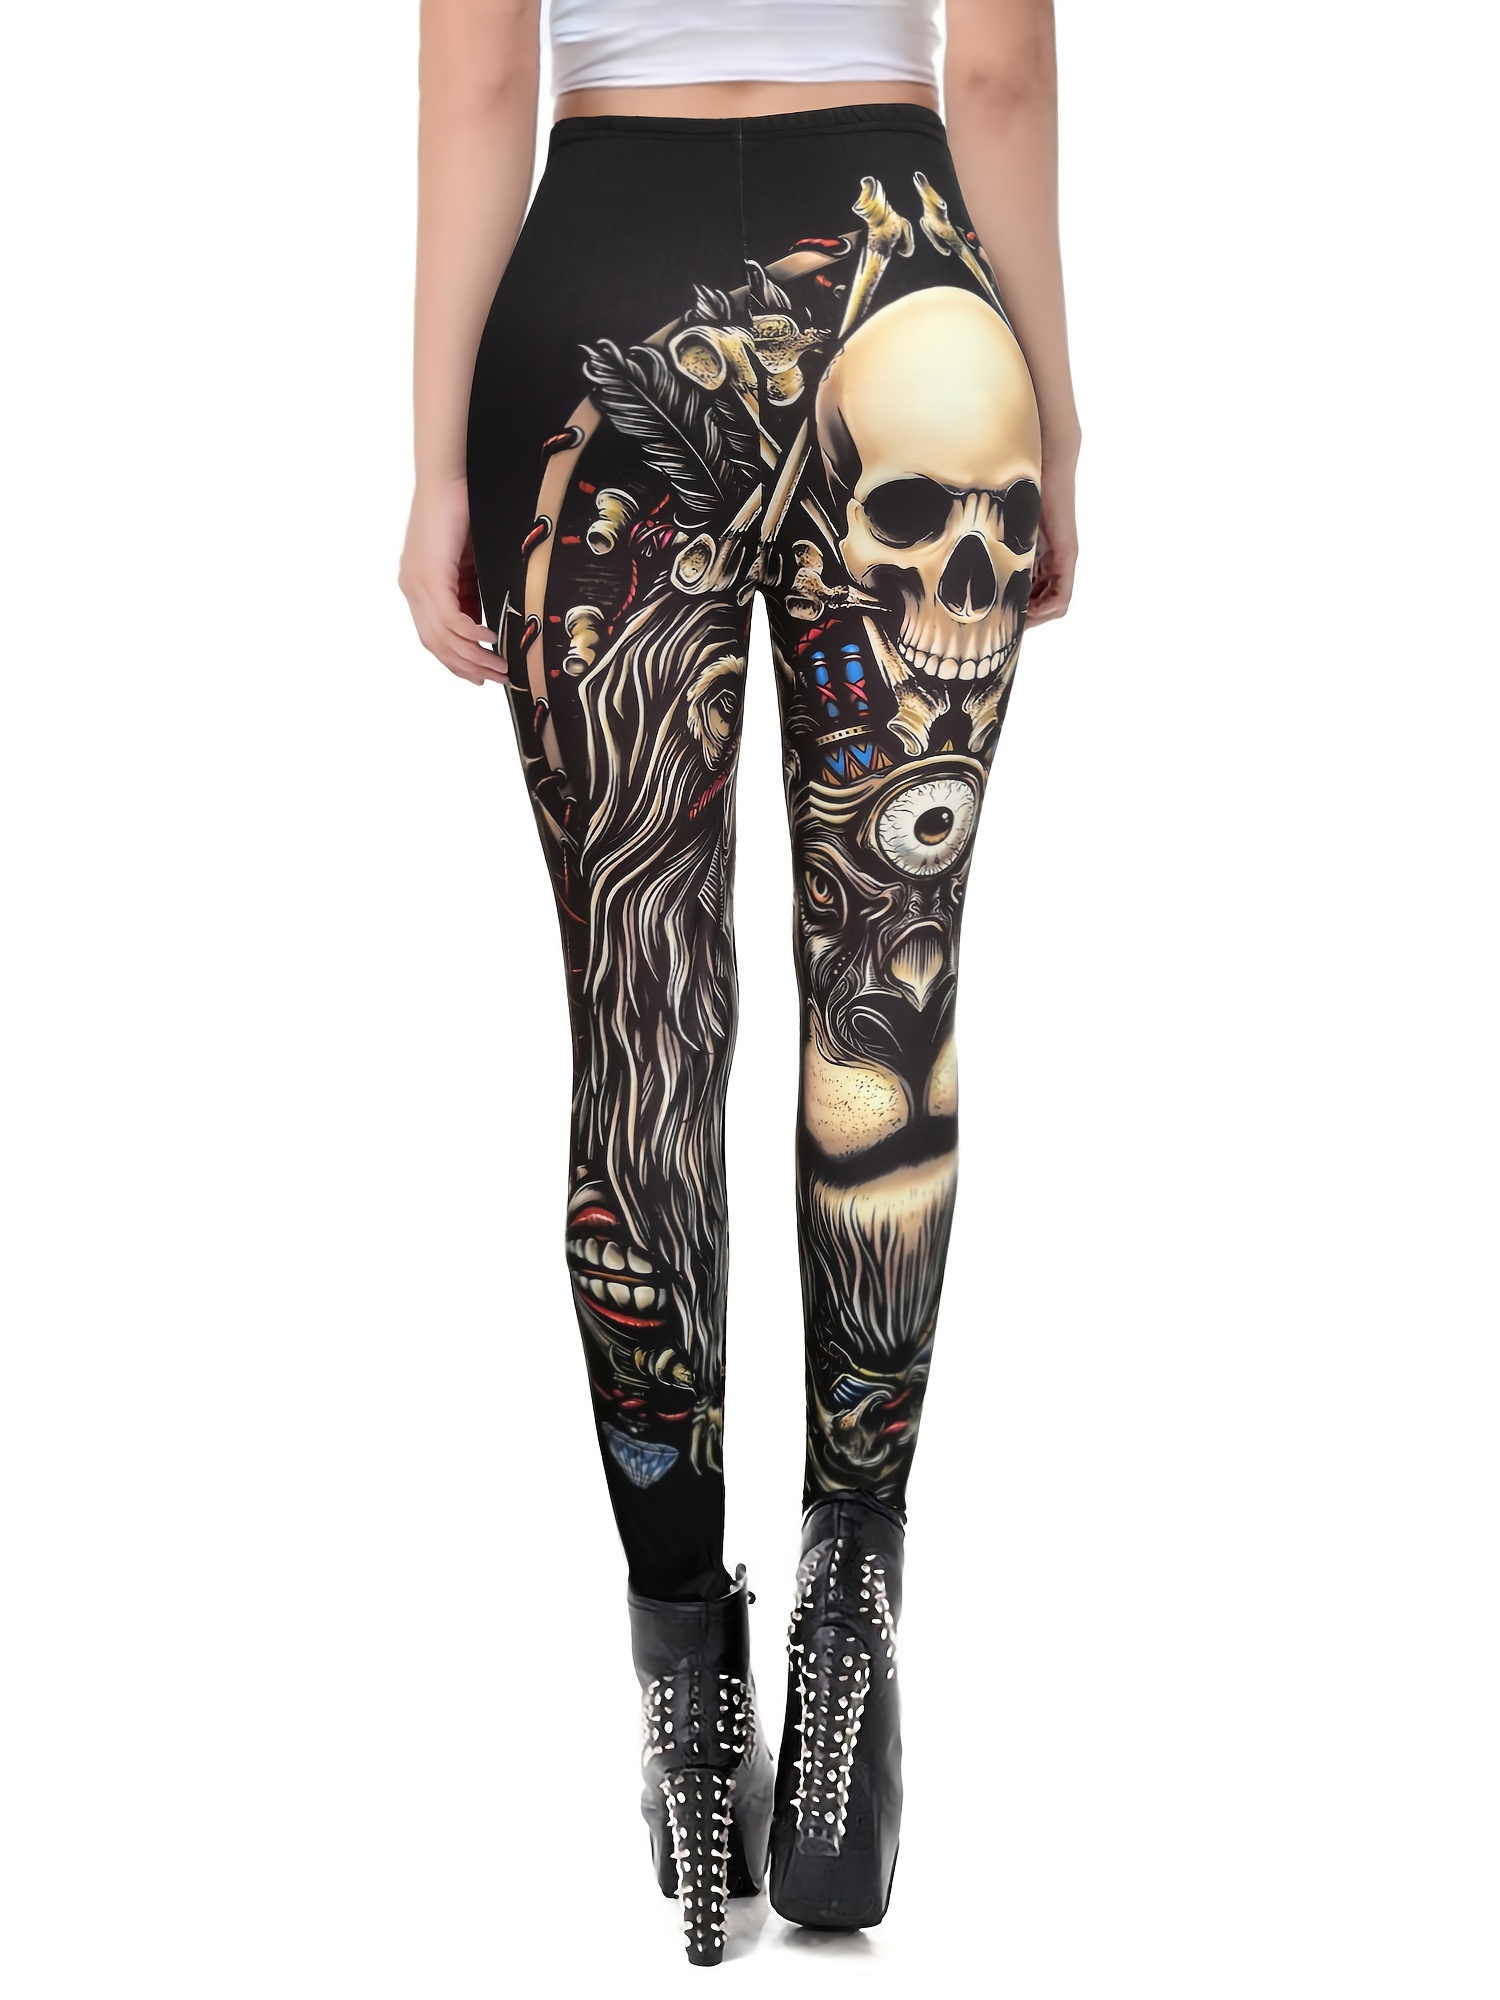 Iootiany High Waist 3d Skeleton Print Cosplay Fitness Leggings For